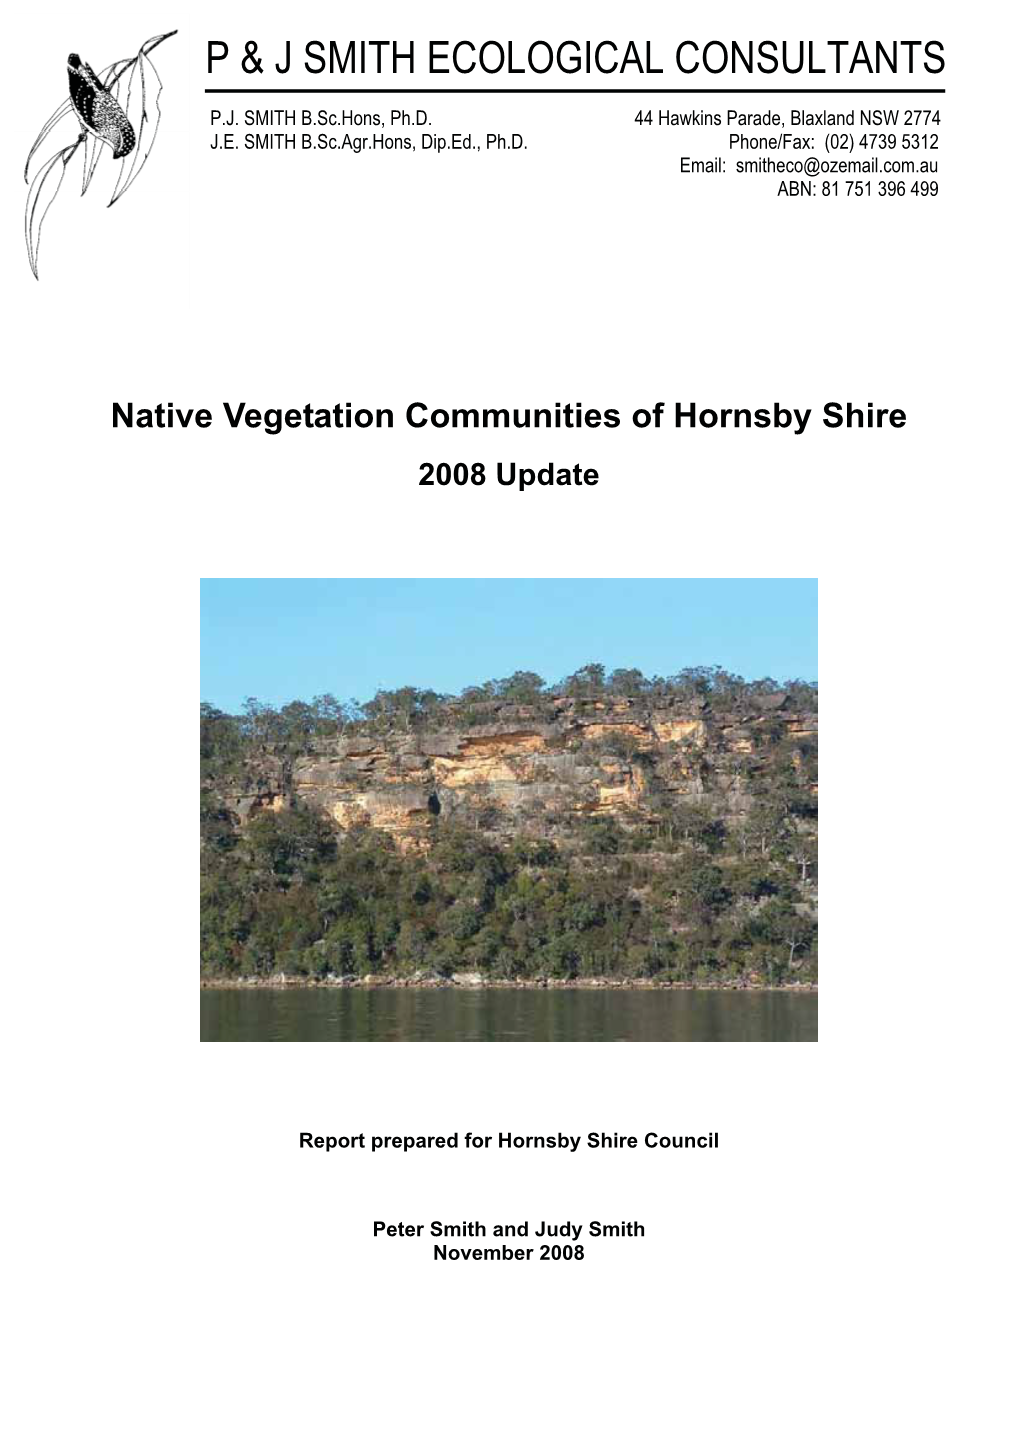 Native Vegetation Communities of Hornsby Shire Council